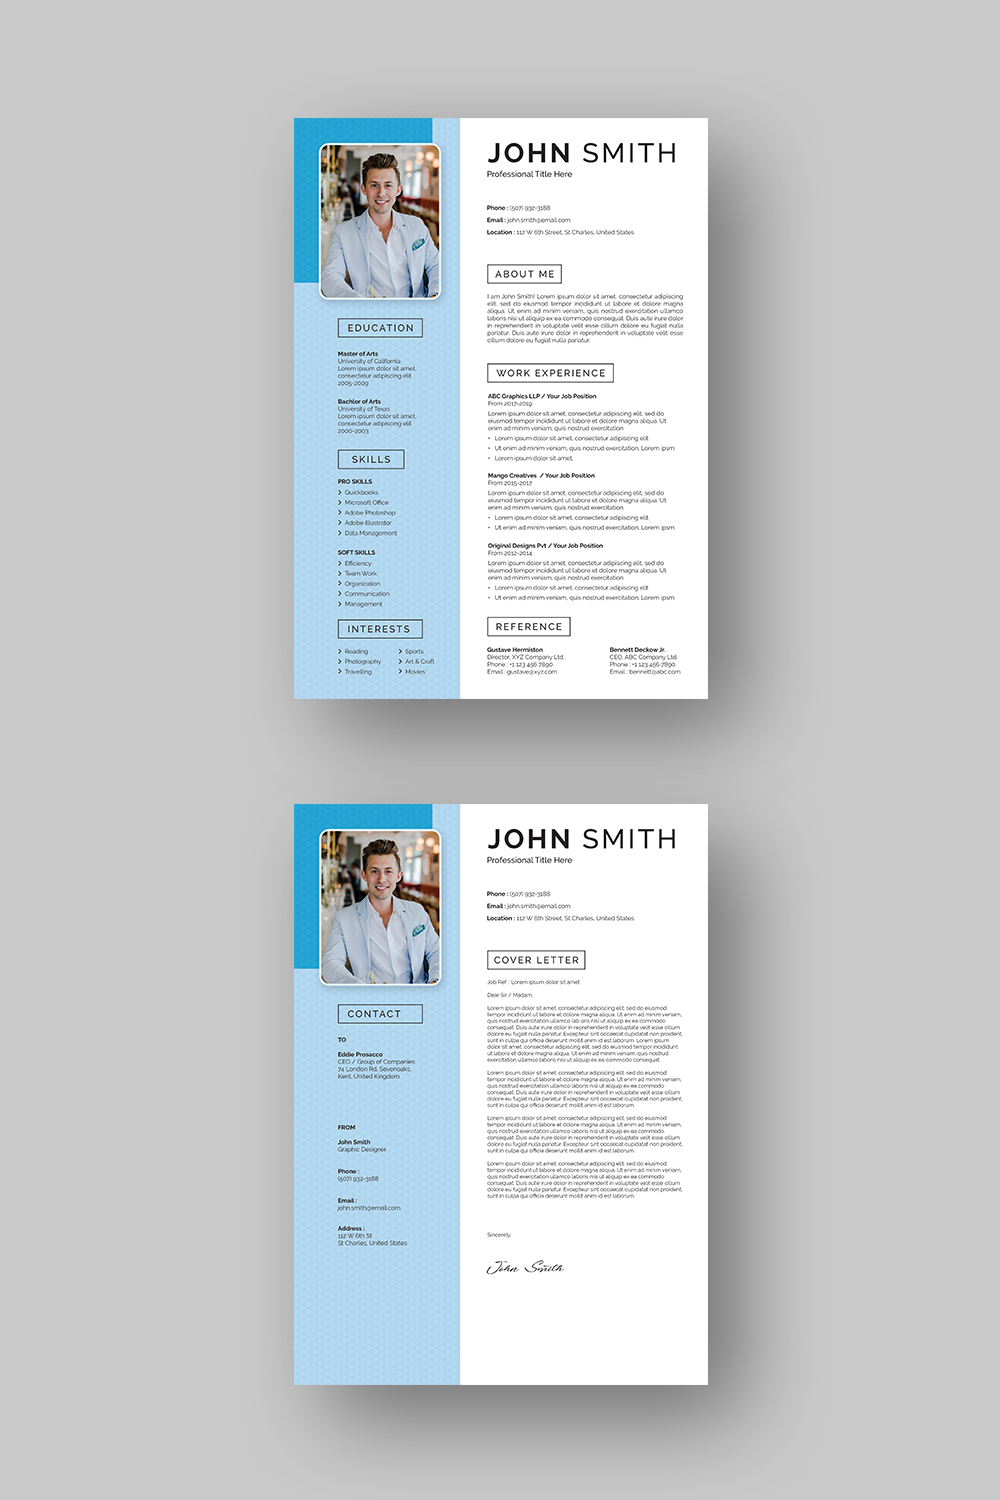 Two professional resume templates with blue accents.